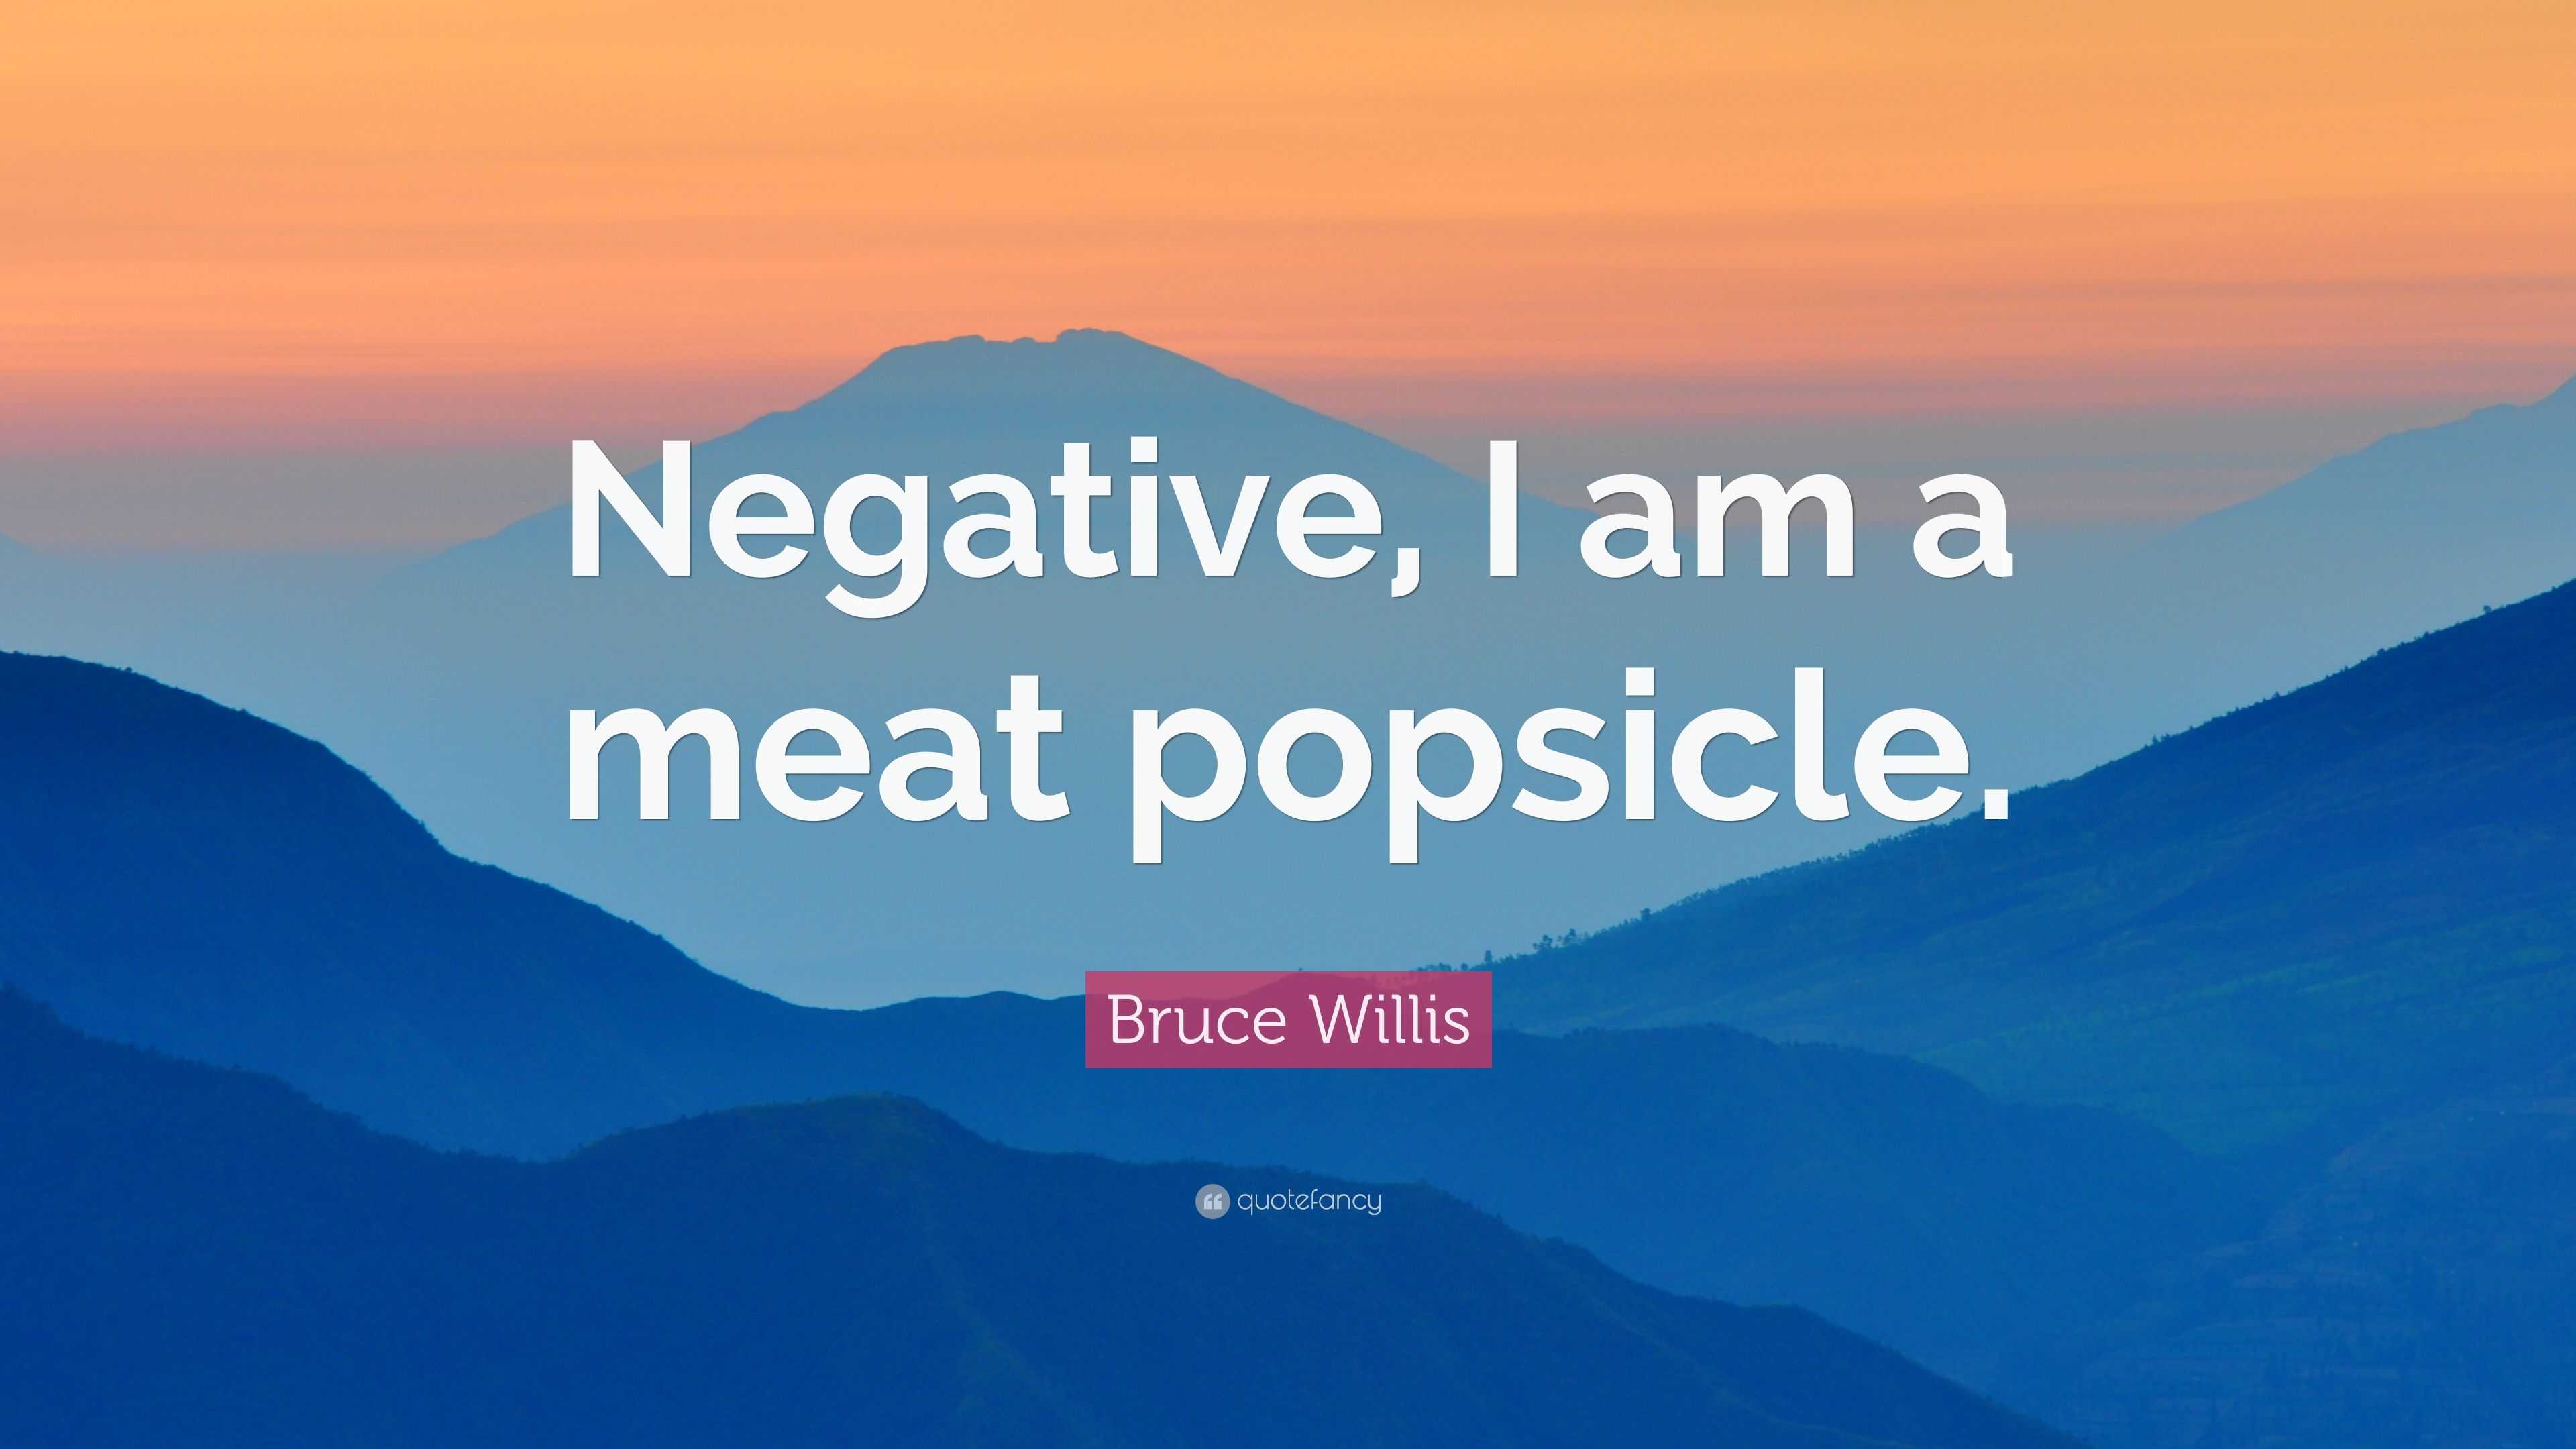 Bruce Willis Quote: "Negative, I am a meat popsicle." (9 wallpapers) - Quotefancy